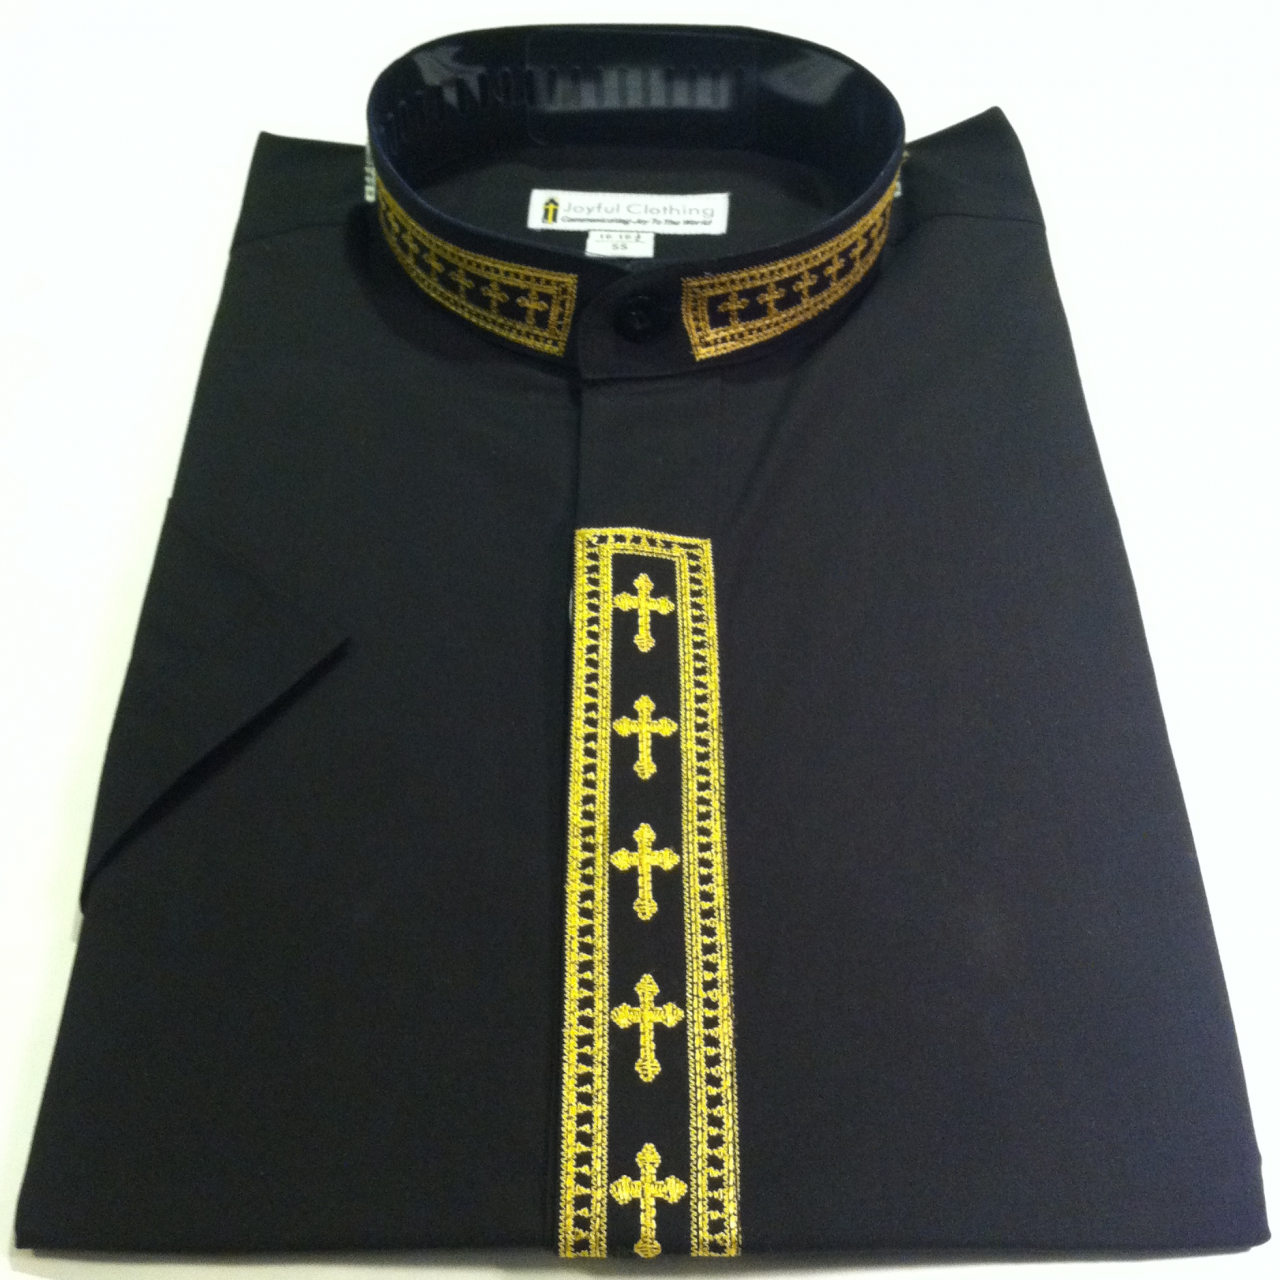 756. Women's Short-Sleeve Clergy Shirt With Fine Embroidery - Black/Gold